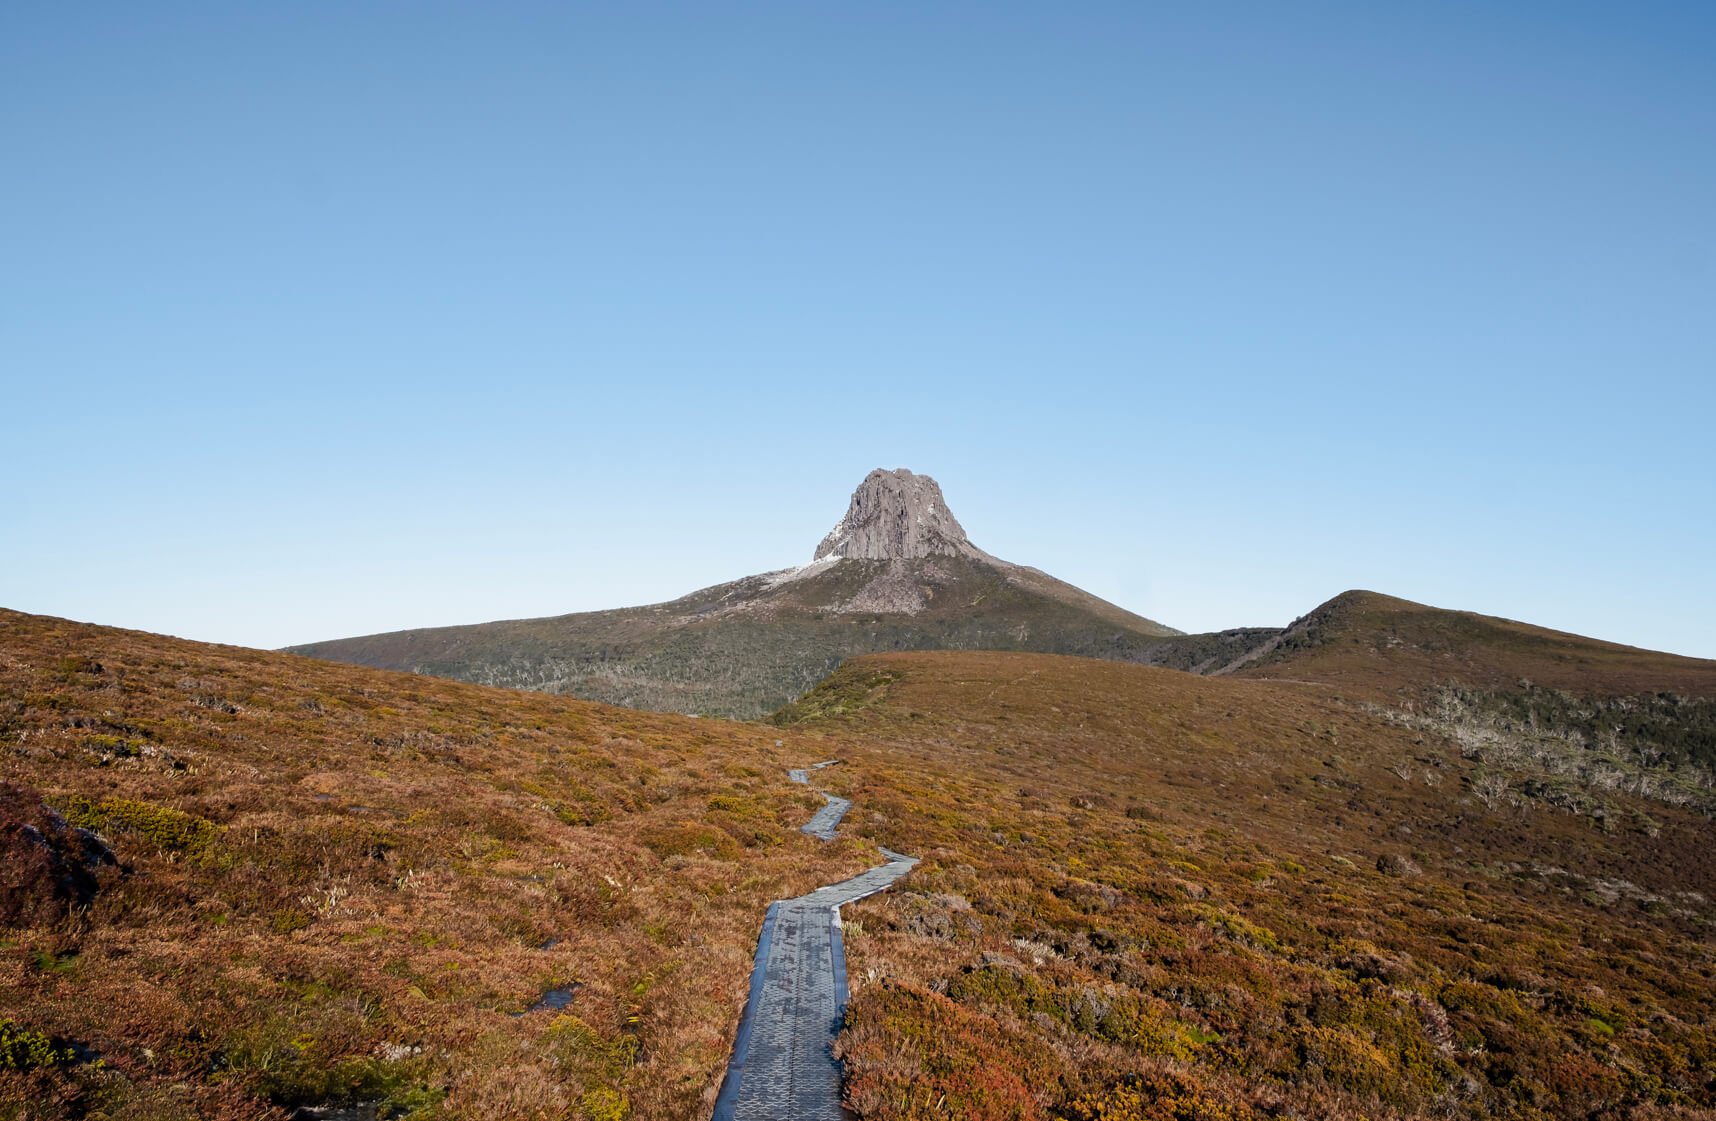 Barn Bluff - a technical mountain in Cradle Mountain - Lake St Clair National Park near the Overland Track